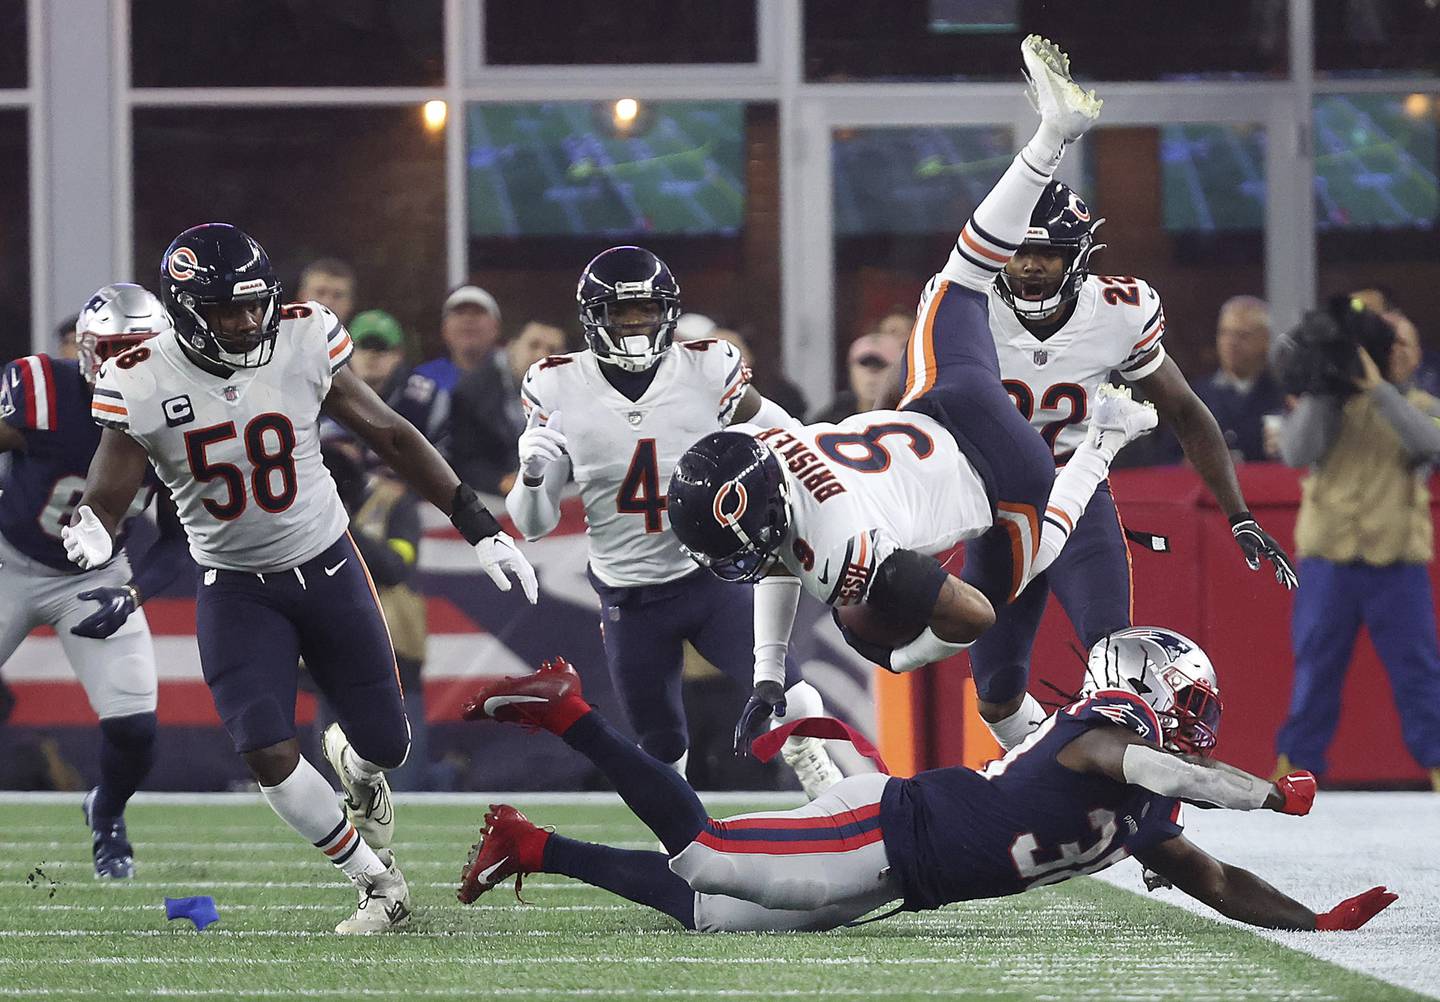 Bears safety Jaquan Brisker flips through air as he is tackled following his interception in the second quarter against the Patriots at Gillette Stadium on Oct. 24, 2022.